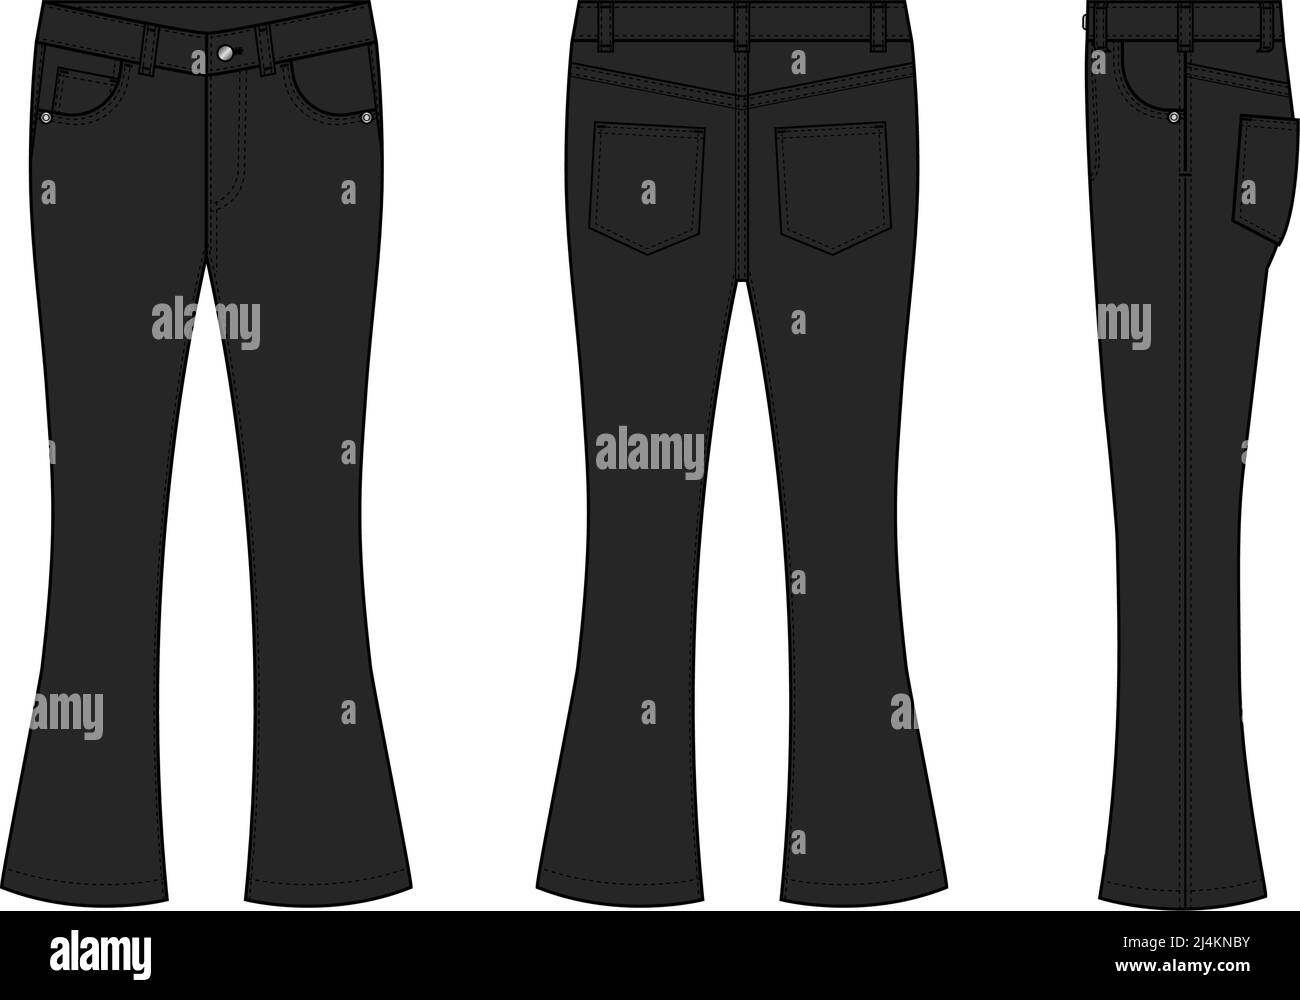 Bootcut jeans pants vector template illustration | black Stock Vector ...